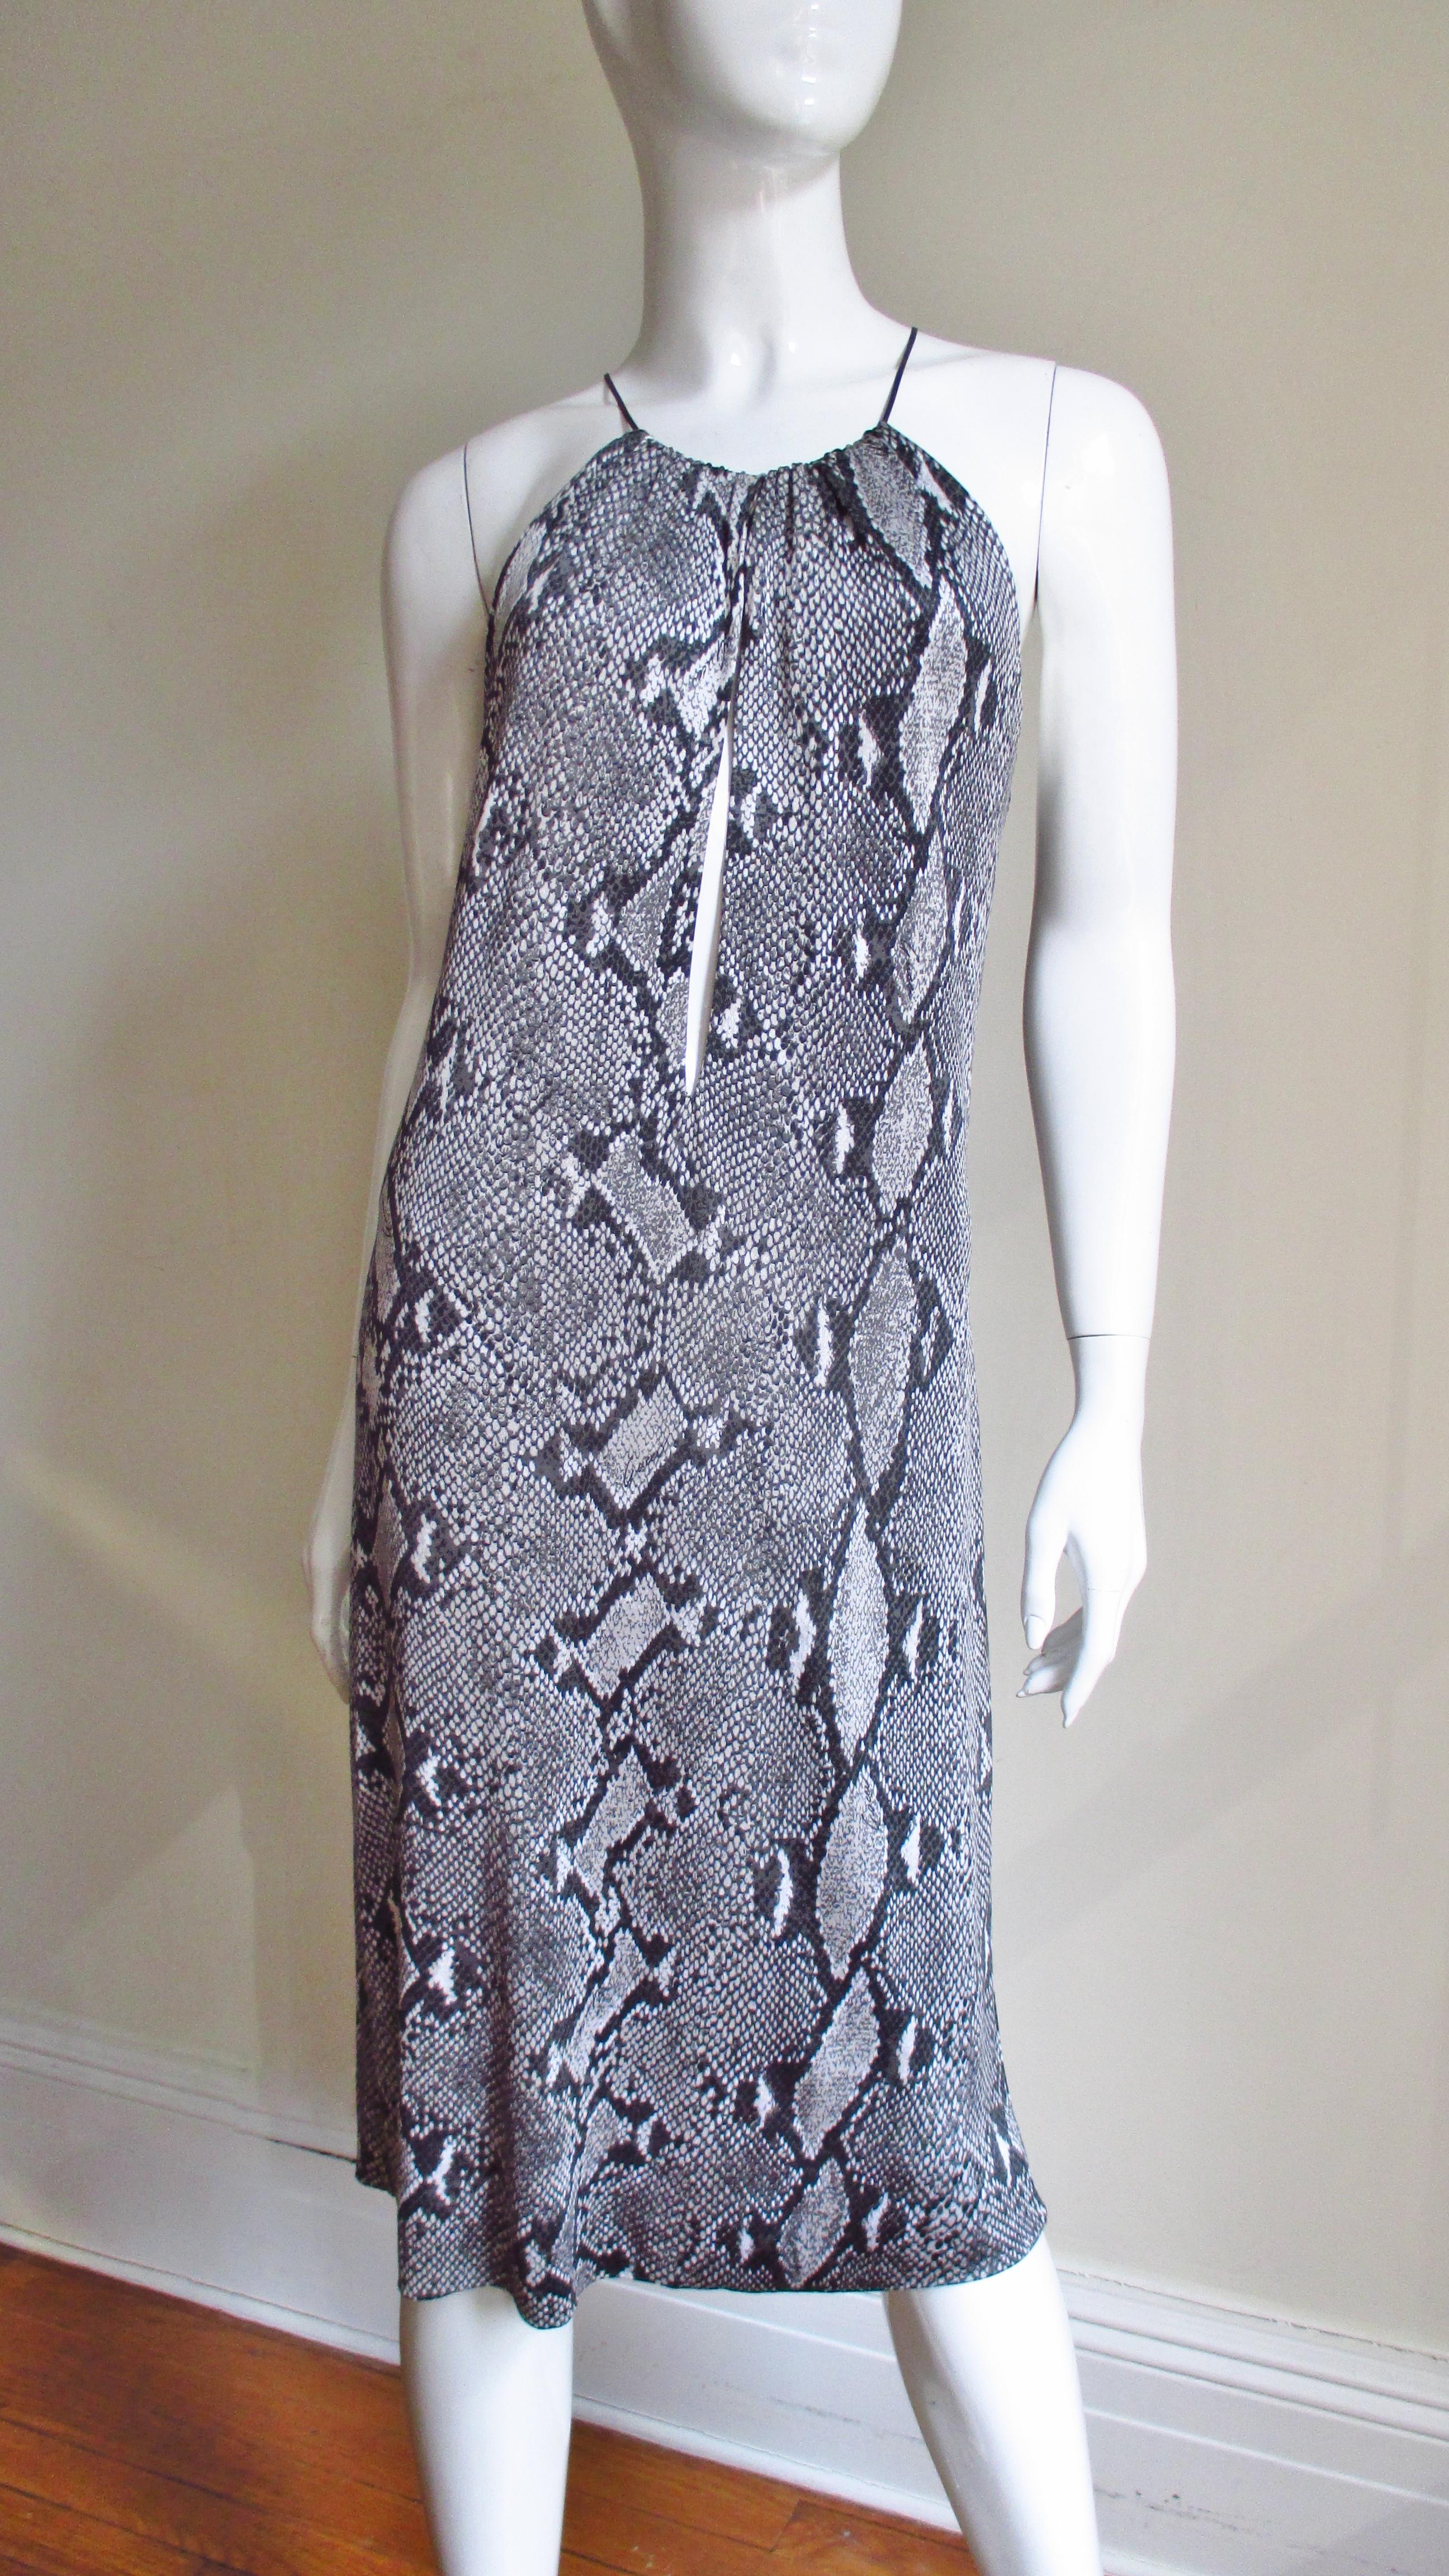 A fabulous iconic python print silk jersey dress from Tom Ford for Gucci S/S 2000 collection in shades of grey.  It has a leather cord closing with a 
Gucci inscribed silver metal clasp at the neckline onto which the front and back of the dress are